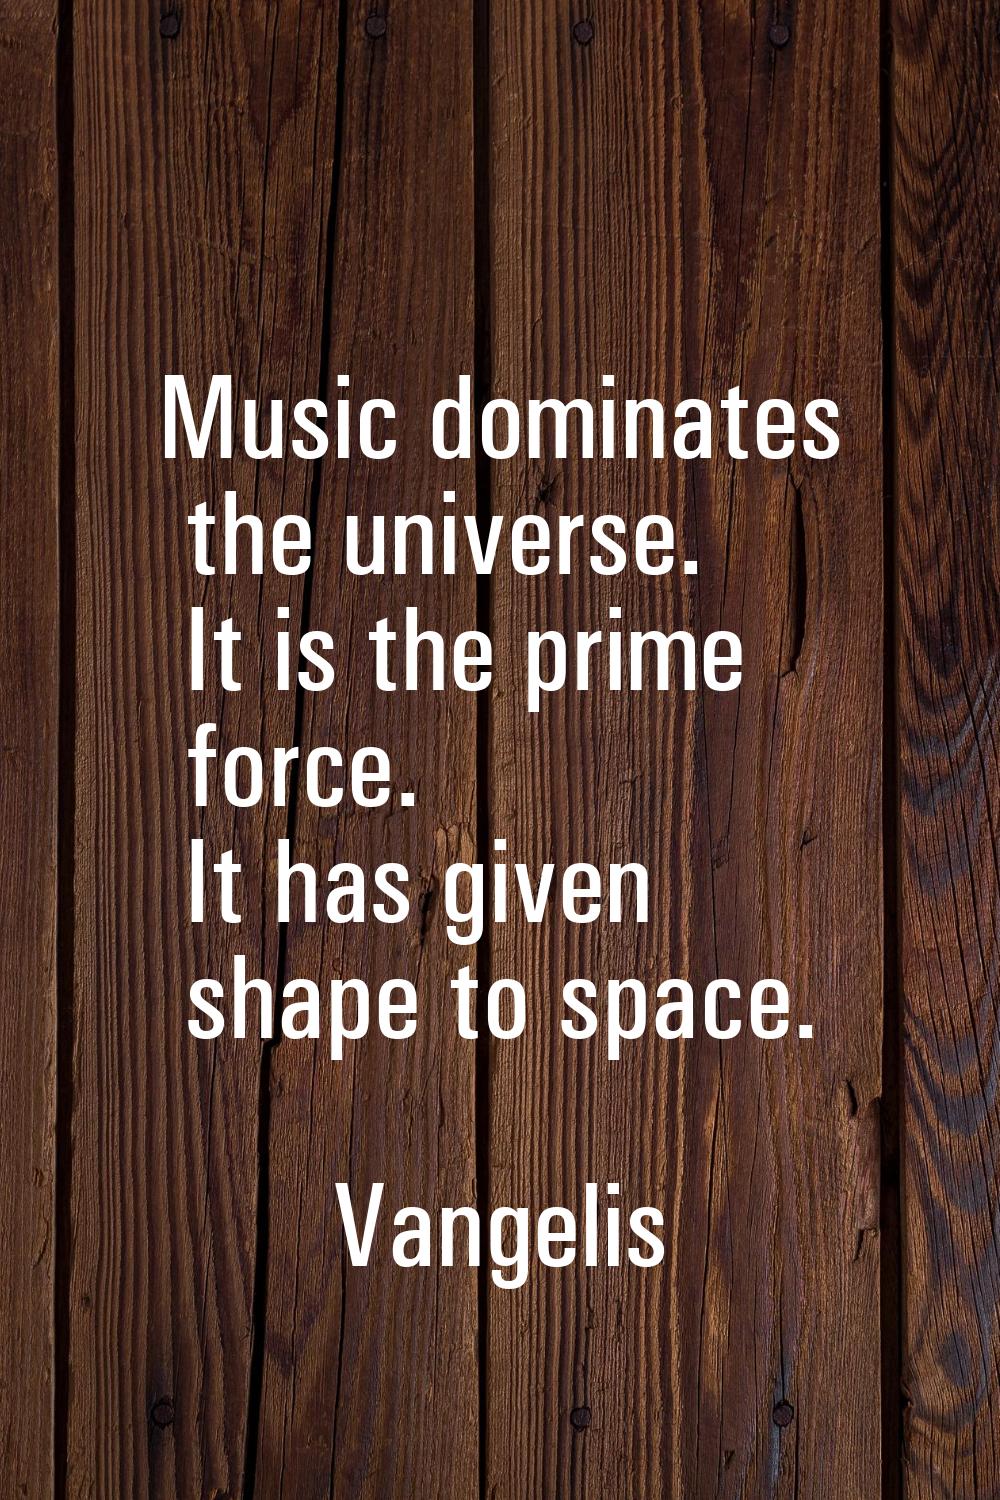 Music dominates the universe. It is the prime force. It has given shape to space.